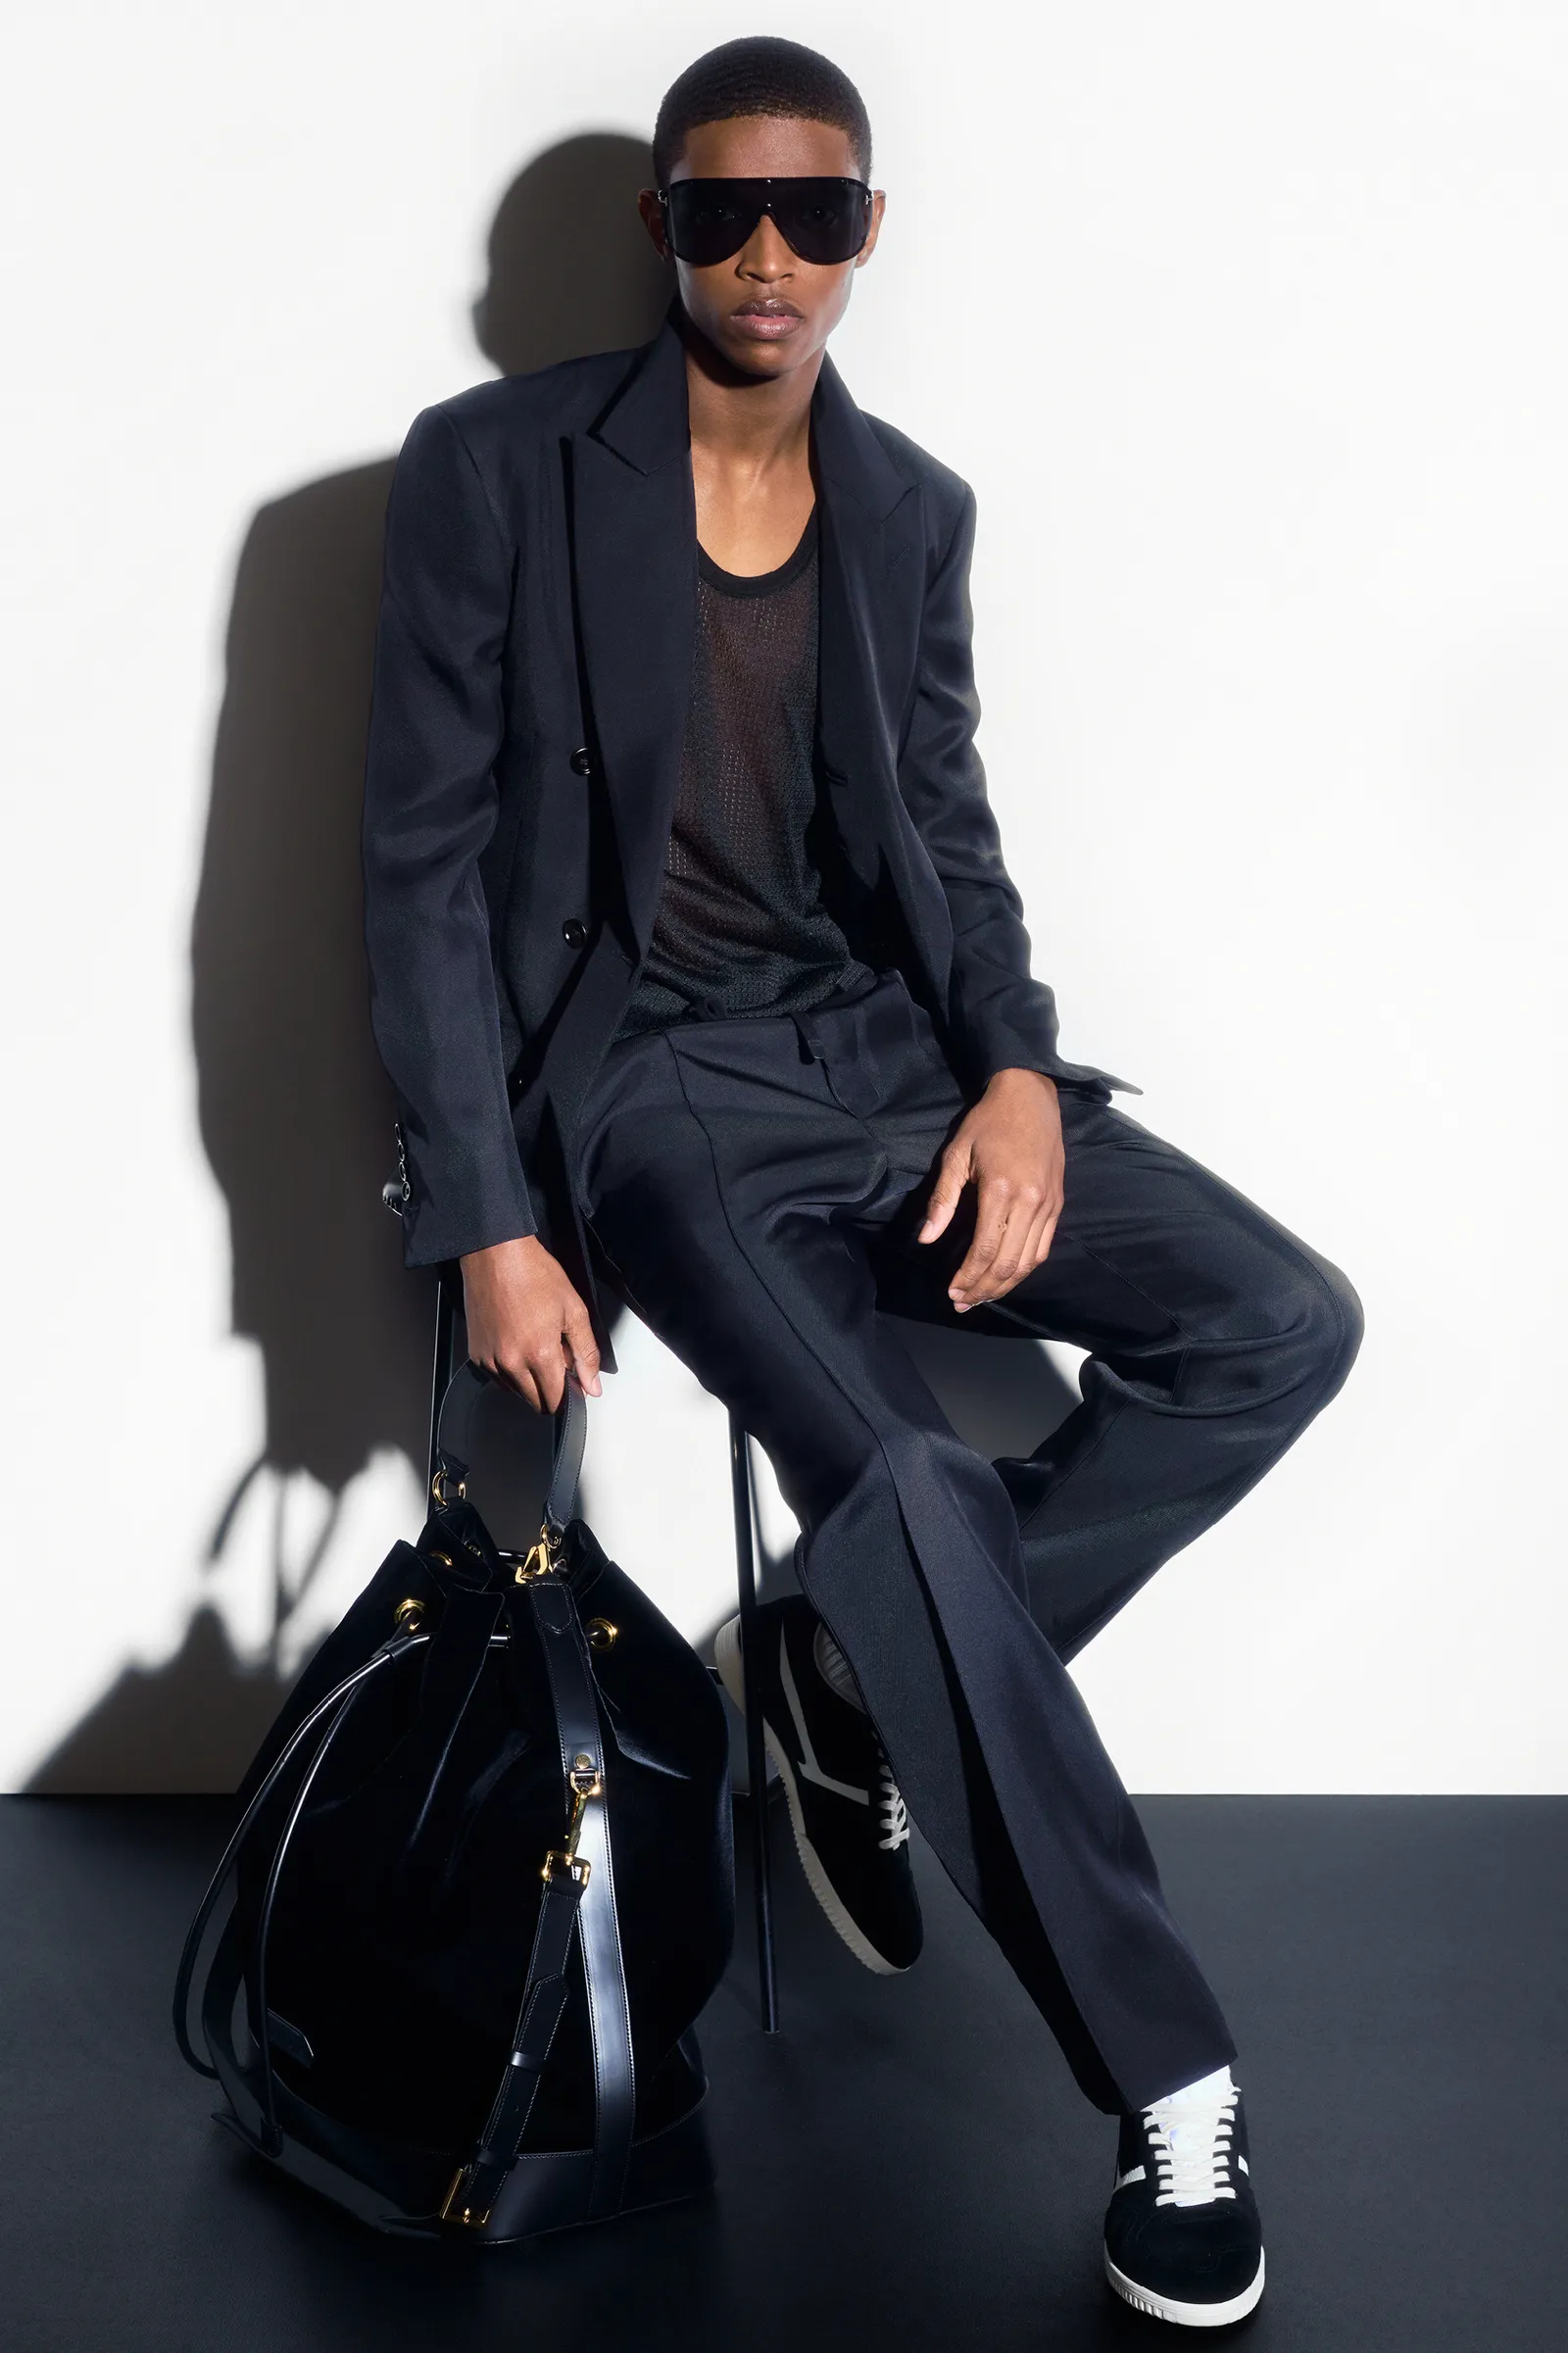 00039-tom-ford-fall-22-mens-nyc-credit-brand.png